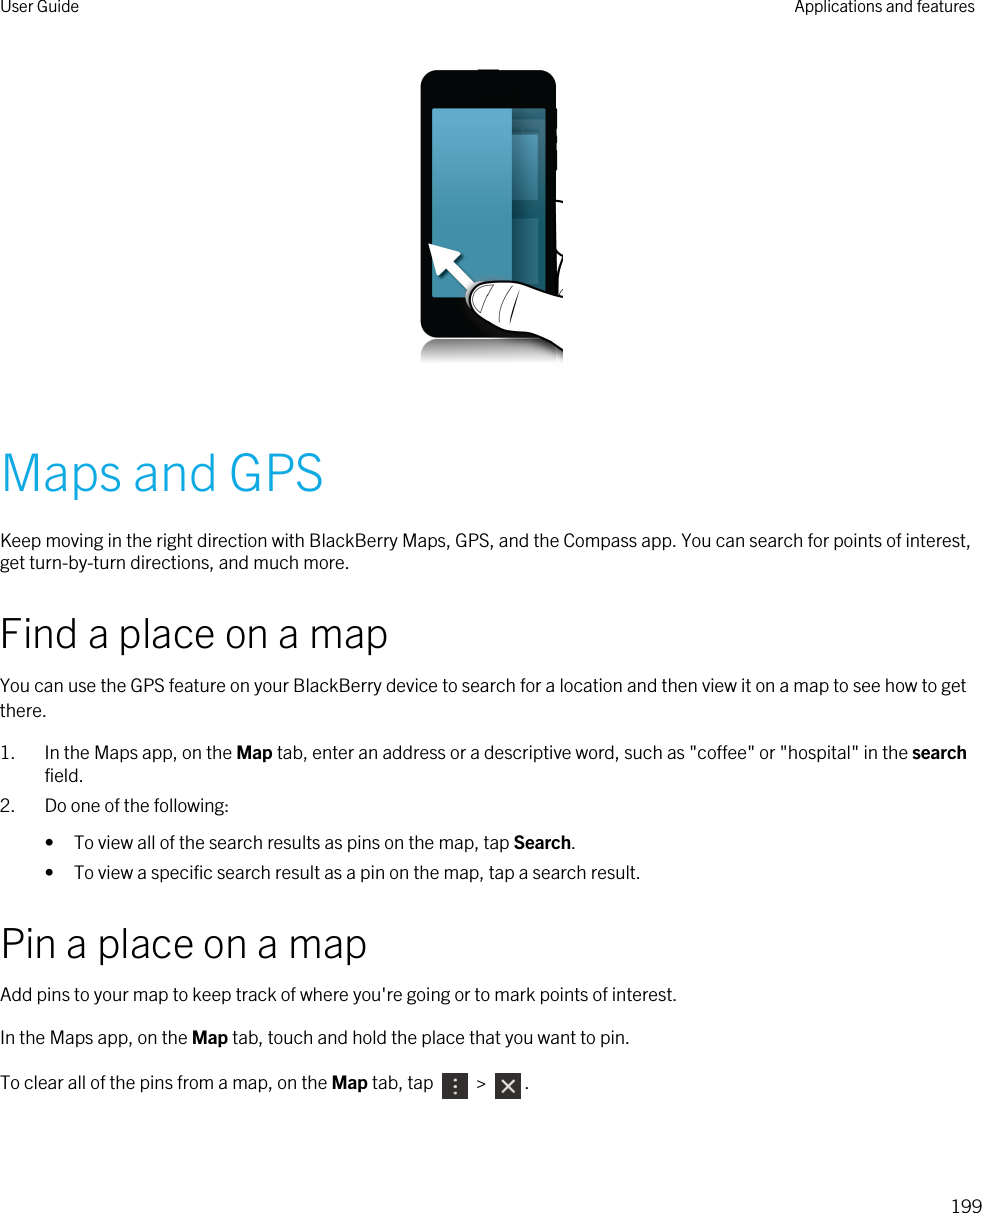  Maps and GPSKeep moving in the right direction with BlackBerry Maps, GPS, and the Compass app. You can search for points of interest, get turn-by-turn directions, and much more.Find a place on a mapYou can use the GPS feature on your BlackBerry device to search for a location and then view it on a map to see how to get there.1. In the Maps app, on the Map tab, enter an address or a descriptive word, such as &quot;coffee&quot; or &quot;hospital&quot; in the search field.2. Do one of the following:• To view all of the search results as pins on the map, tap Search.• To view a specific search result as a pin on the map, tap a search result.Pin a place on a mapAdd pins to your map to keep track of where you&apos;re going or to mark points of interest.In the Maps app, on the Map tab, touch and hold the place that you want to pin.To clear all of the pins from a map, on the Map tab, tap   &gt;  .User Guide Applications and features199